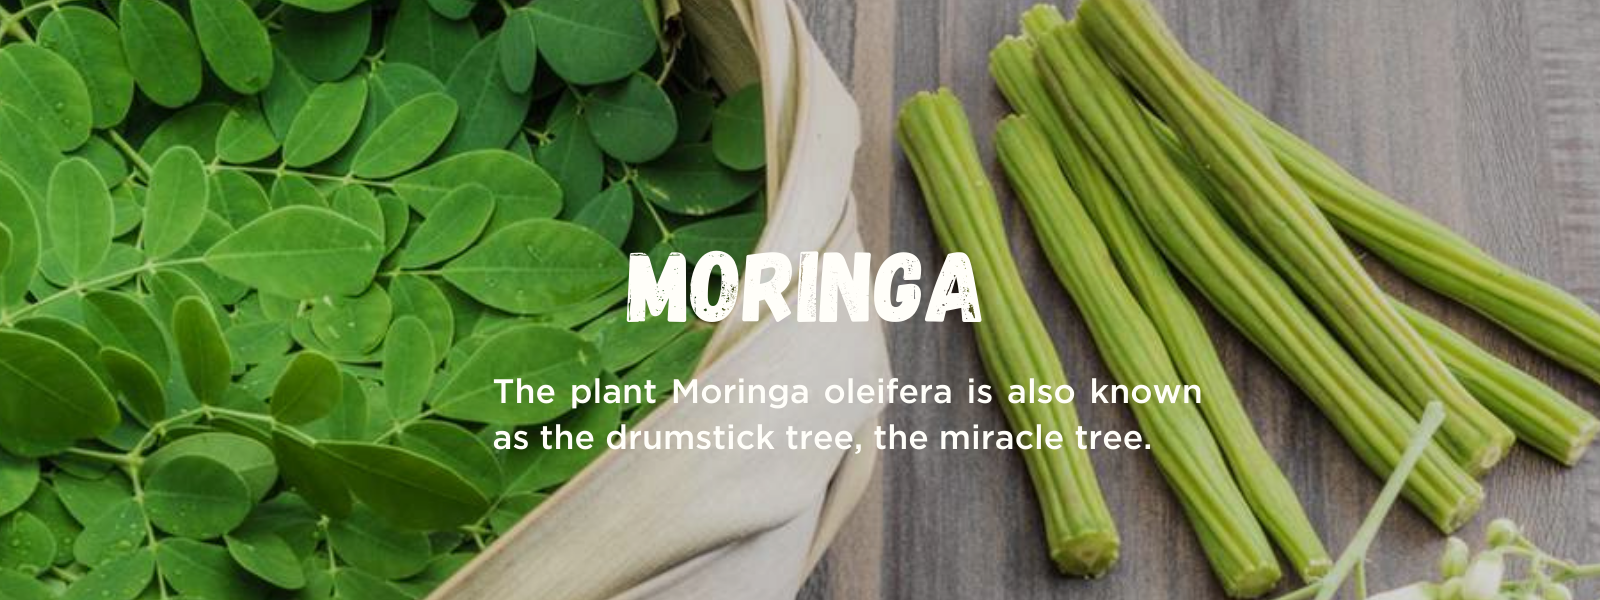 Moringa - Health Benefits, Uses and Important Facts